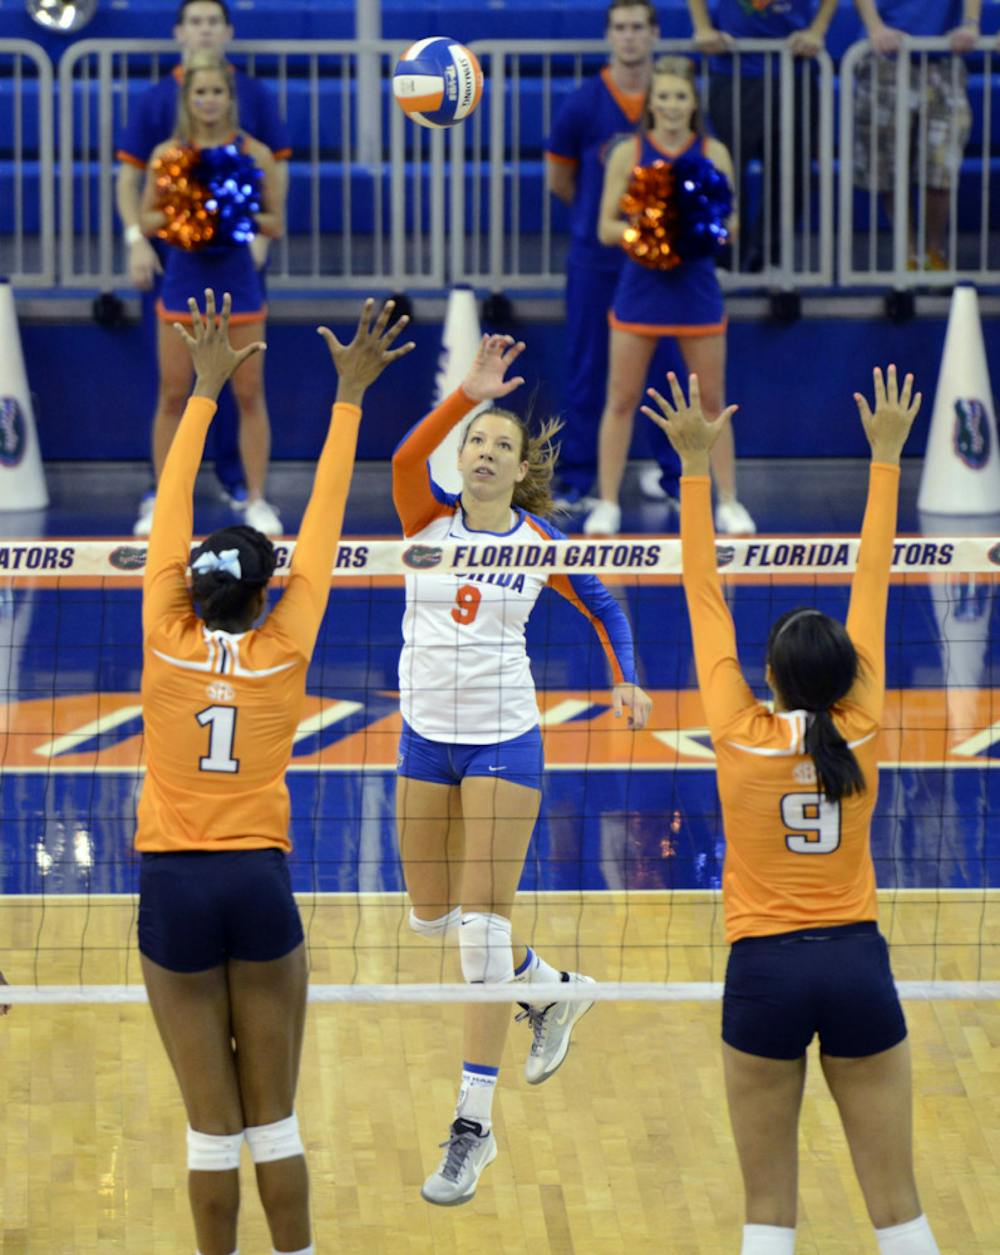 <p>Ziva Recek reaches for the ball during Florida’s three-set victory against Tennessee on Oct. 27 in the O’Connell Center.</p>